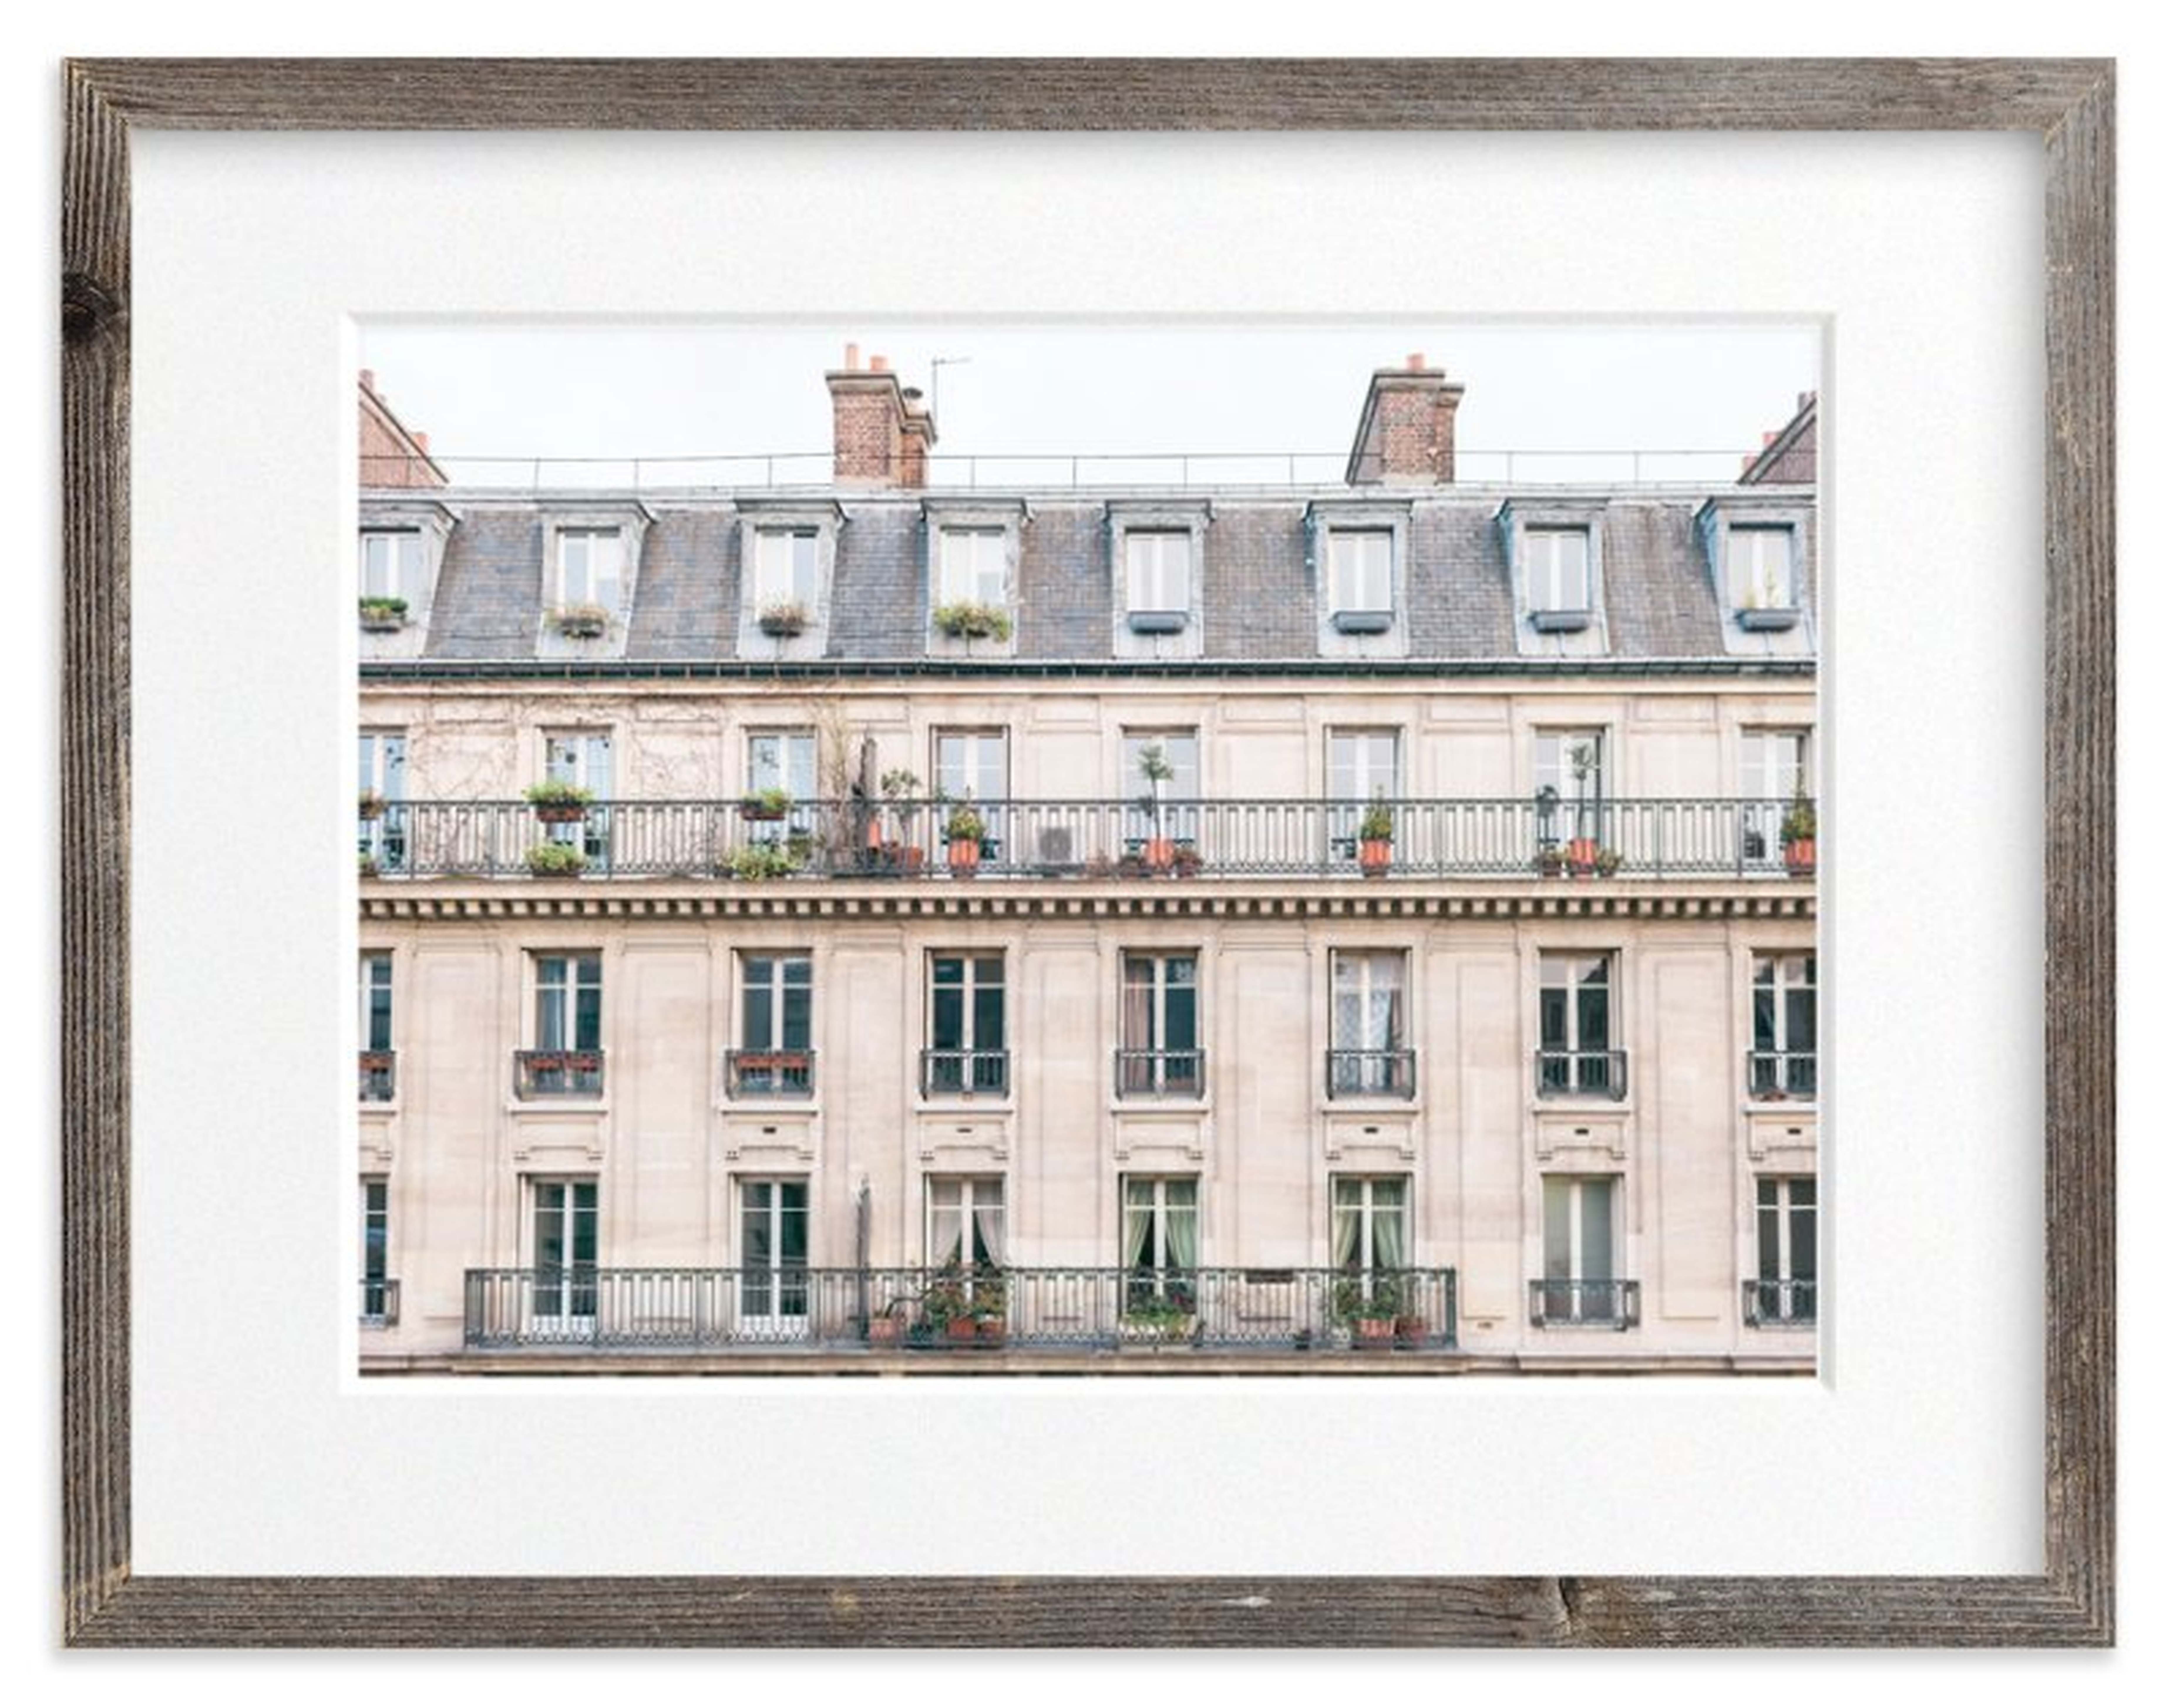 Days in Paris - Crema -54x40 - Barn Wood Frame - Matted - Minted